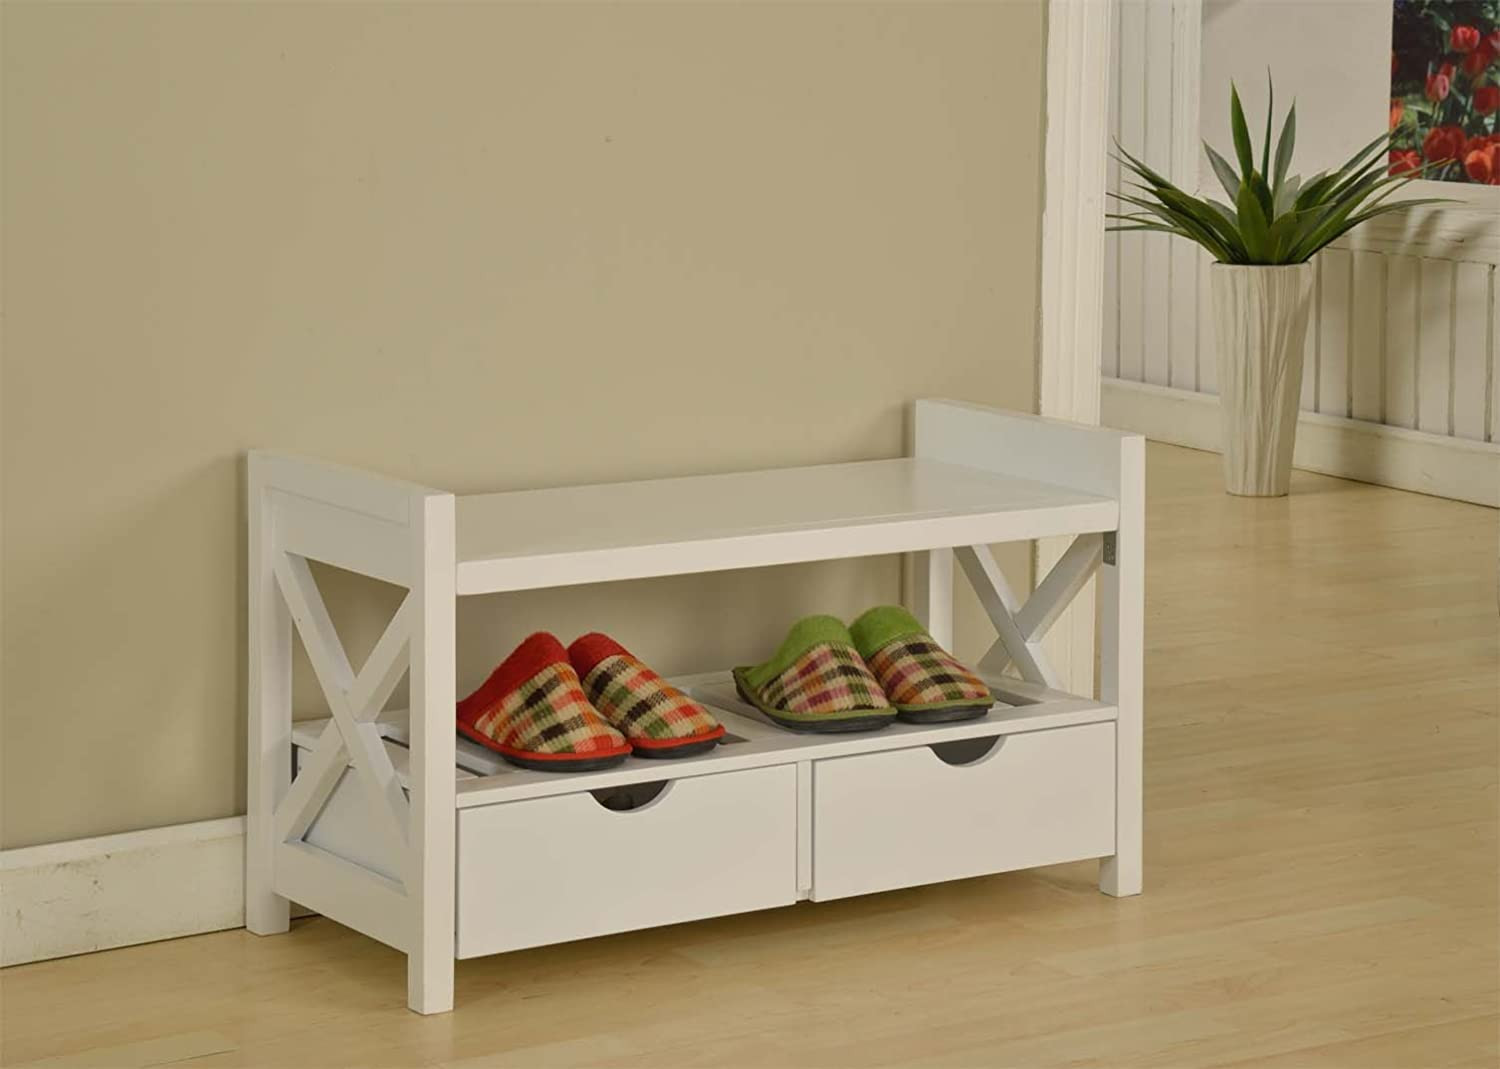 White Storage Bench With Drawers
 Kings Brand White Finish Wood Shoe Storage Bench With